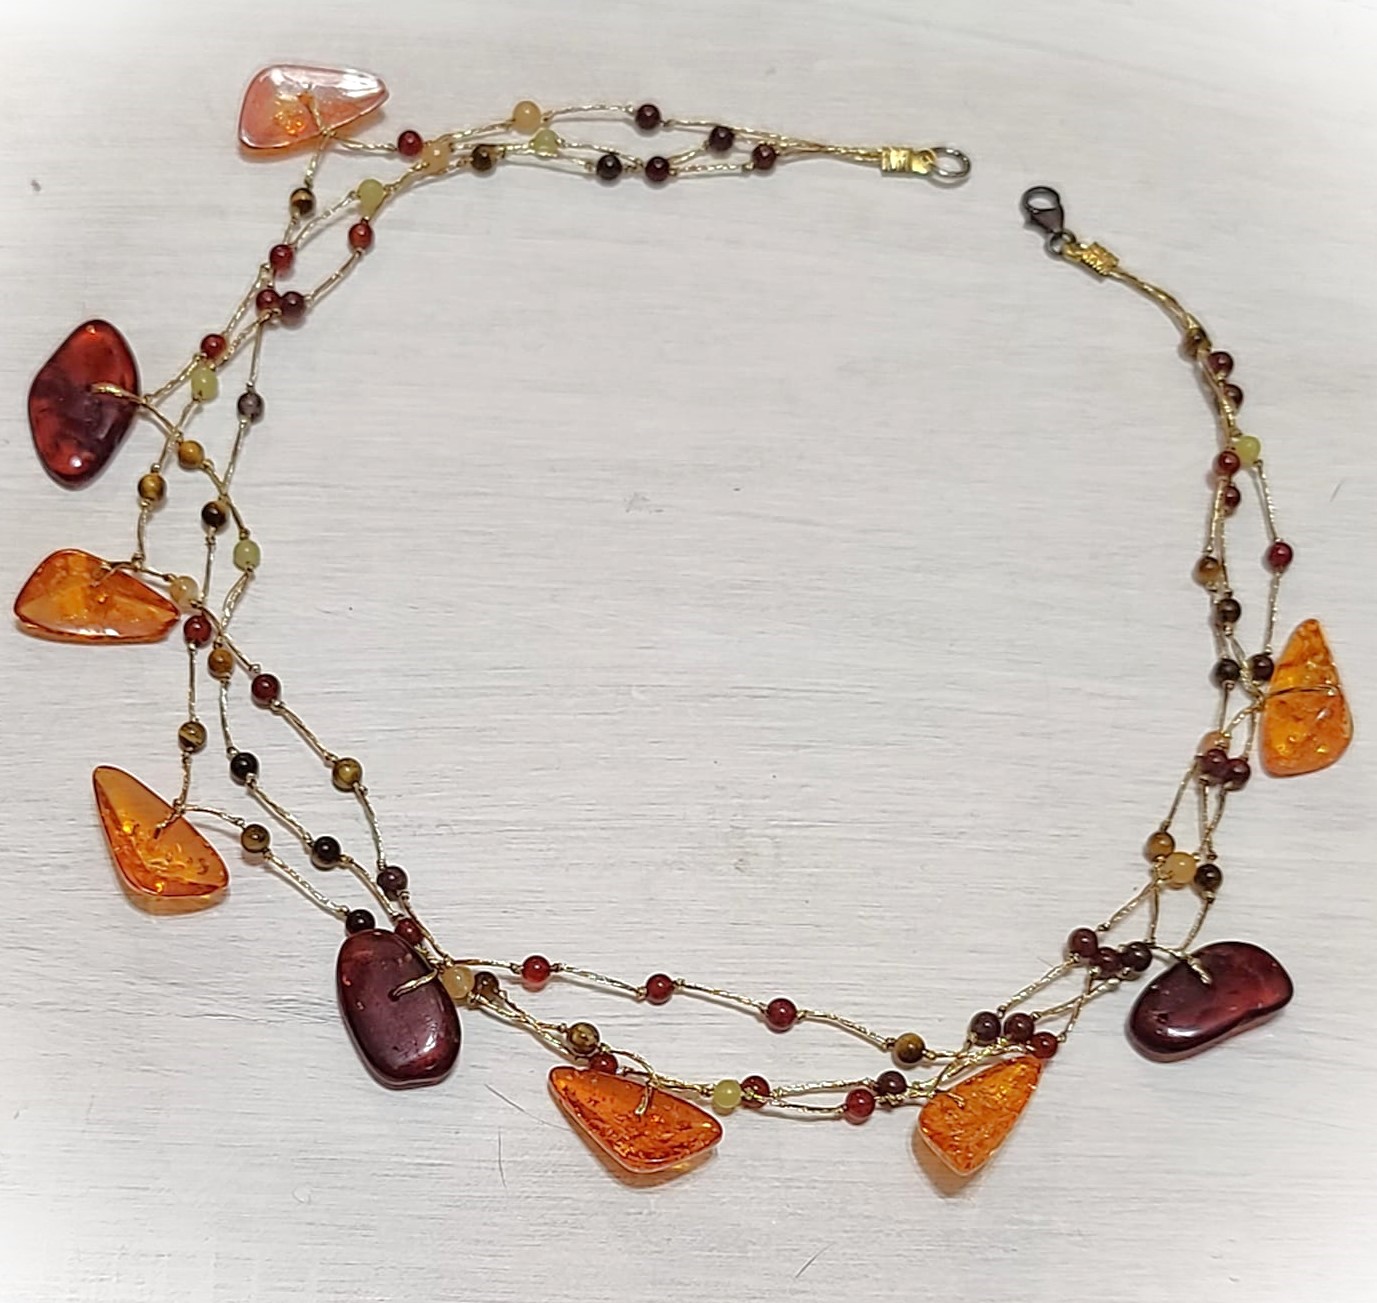 Amber, Agate & Jade Silk Cord Necklace 16"